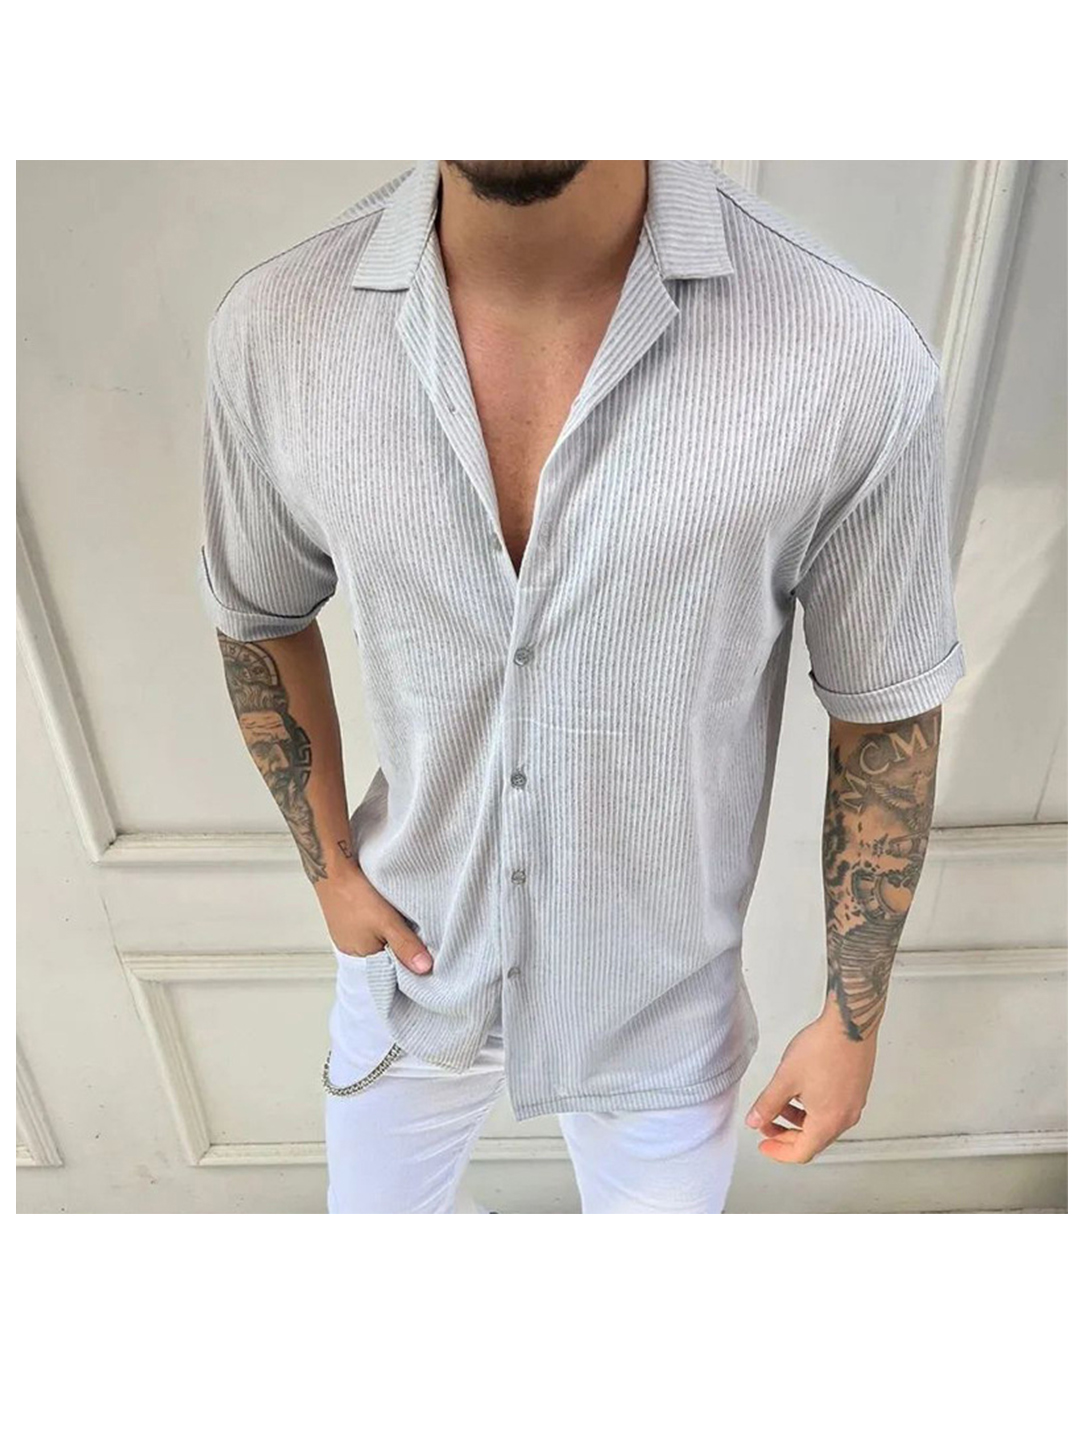 Posey Striped Textured Breathable Comfortable Short-sleeved Shirt-poisonstreetwear.com